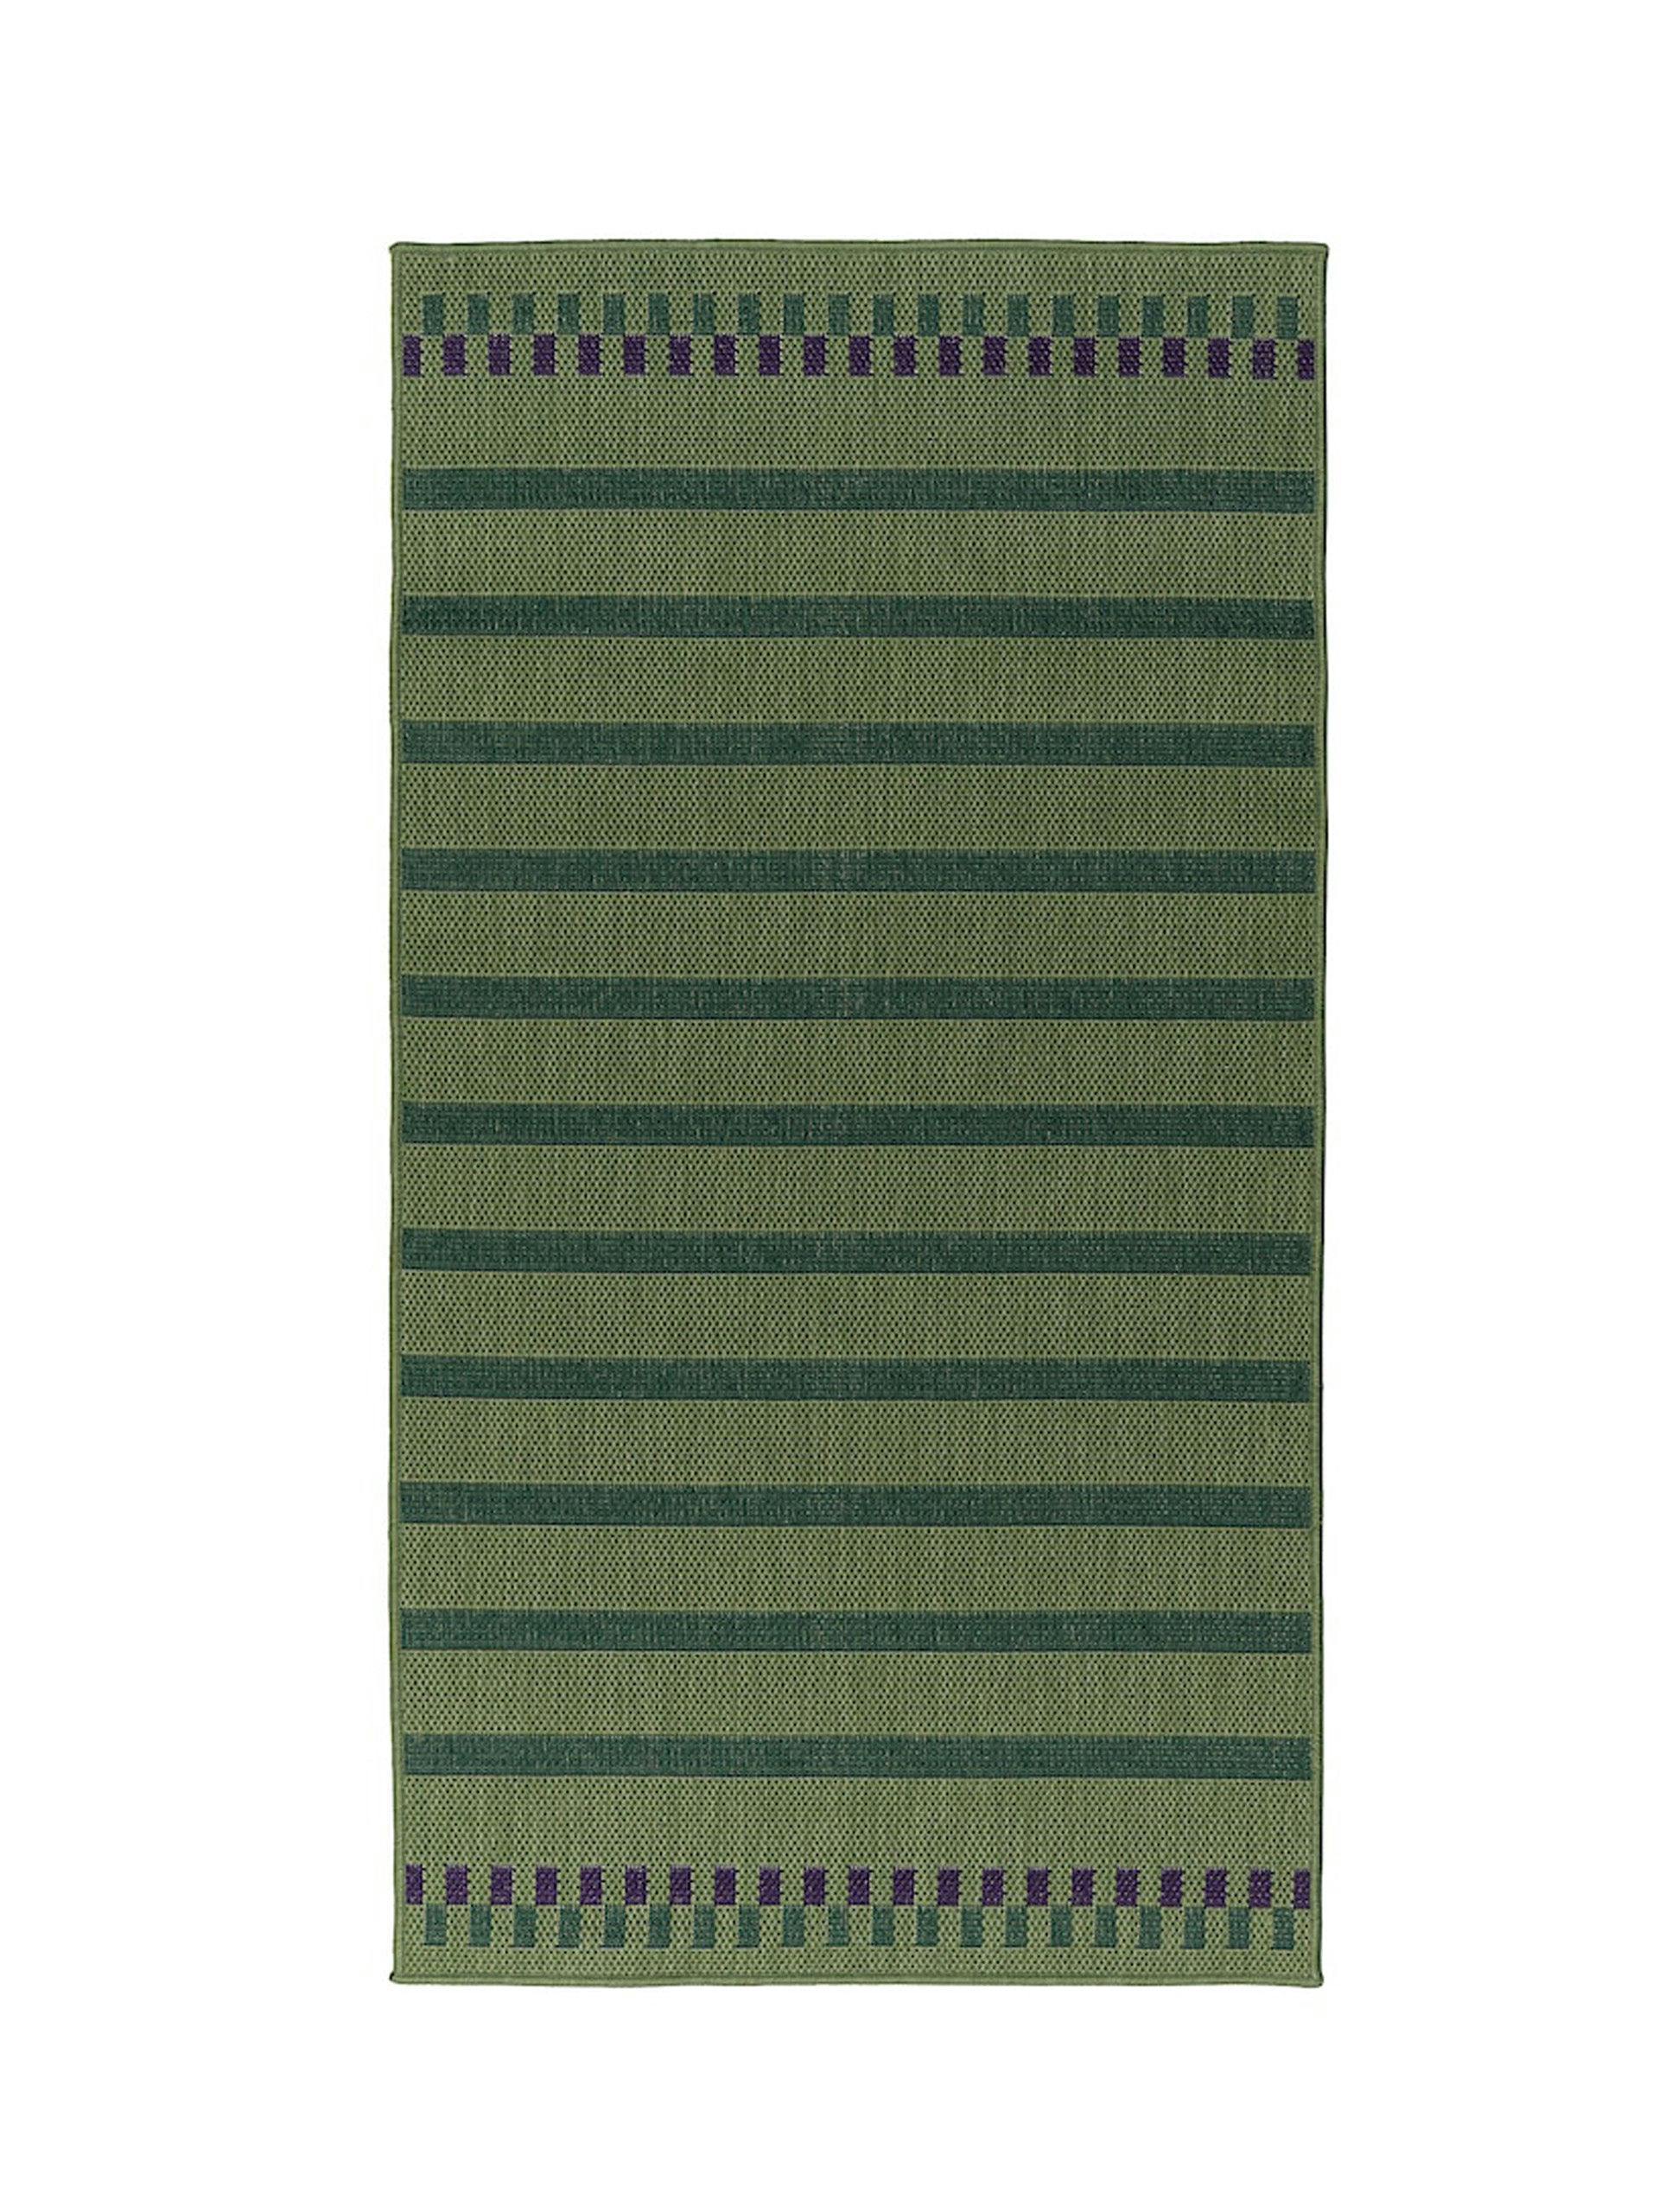 Green and purple striped rug